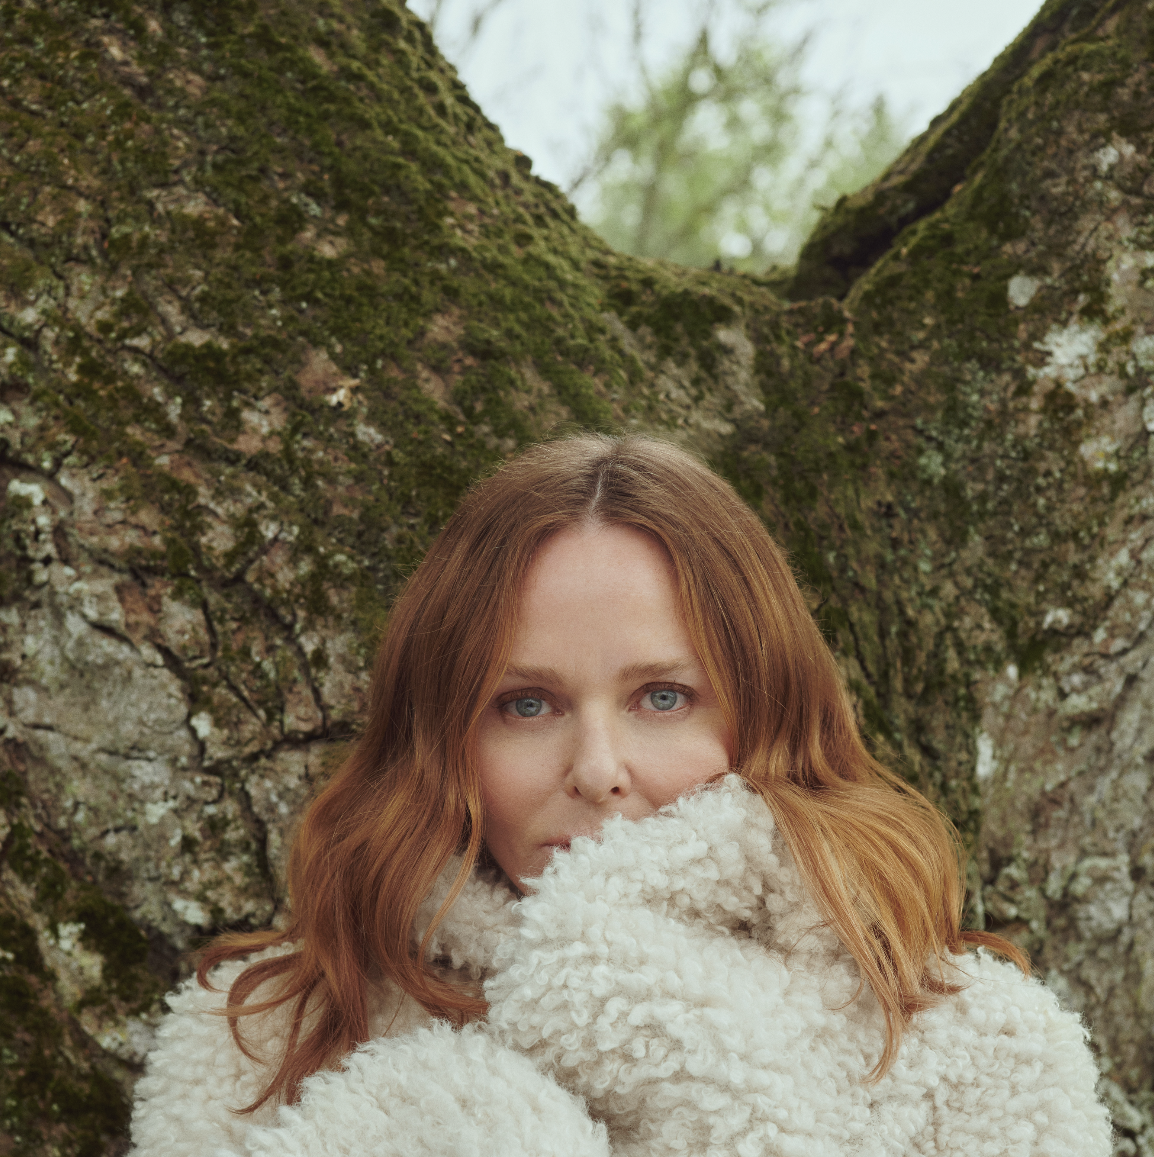 Stella McCartney Says There Are Two Key Essentials to Add to Your